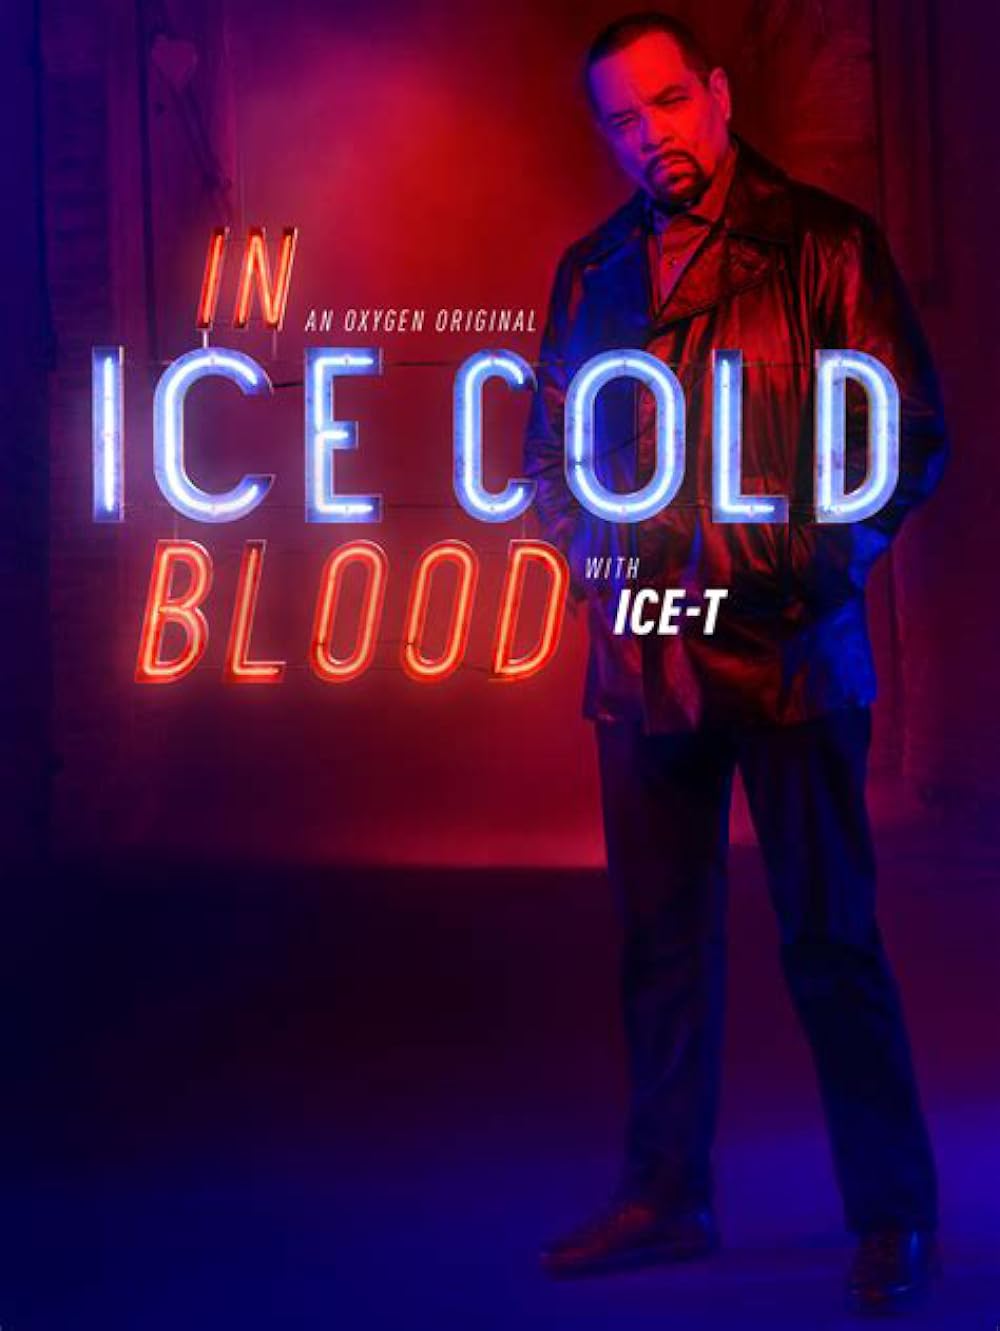 In Ice Cold Blood